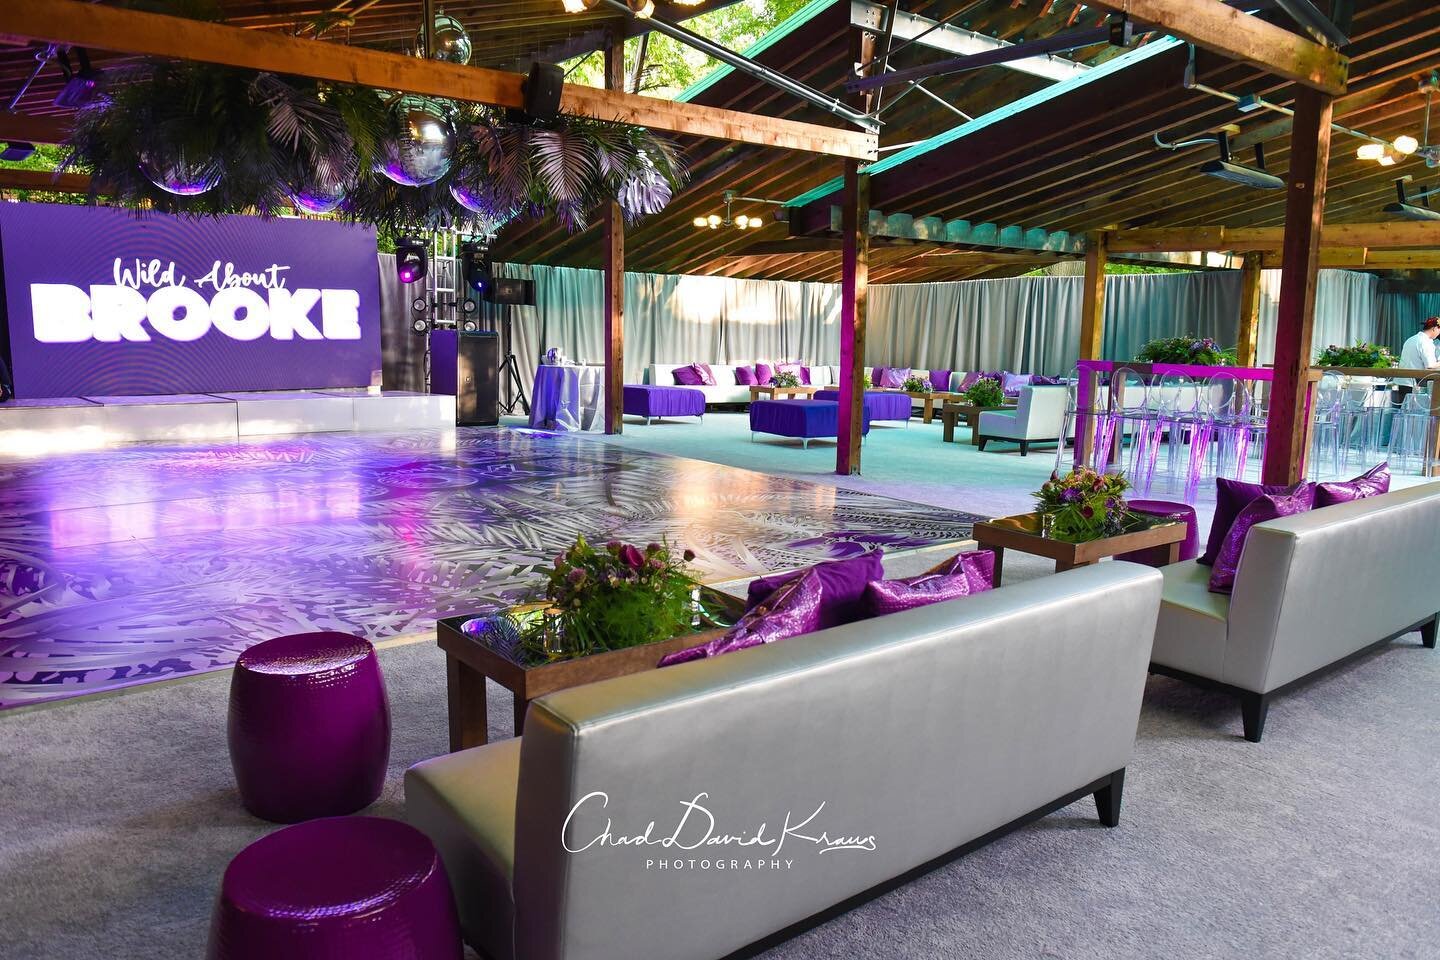 What event this was! We were and still are Wild About Brooke! Transforming the Bronx Zoo&rsquo;s Pavilion was one of our favs! 
Event Planner: @theeventofalifetime 
Photography: @chadkrausphoto 
Venue/Food: @bronxzoo 
Design/Decor: @jw_eventdesign
En